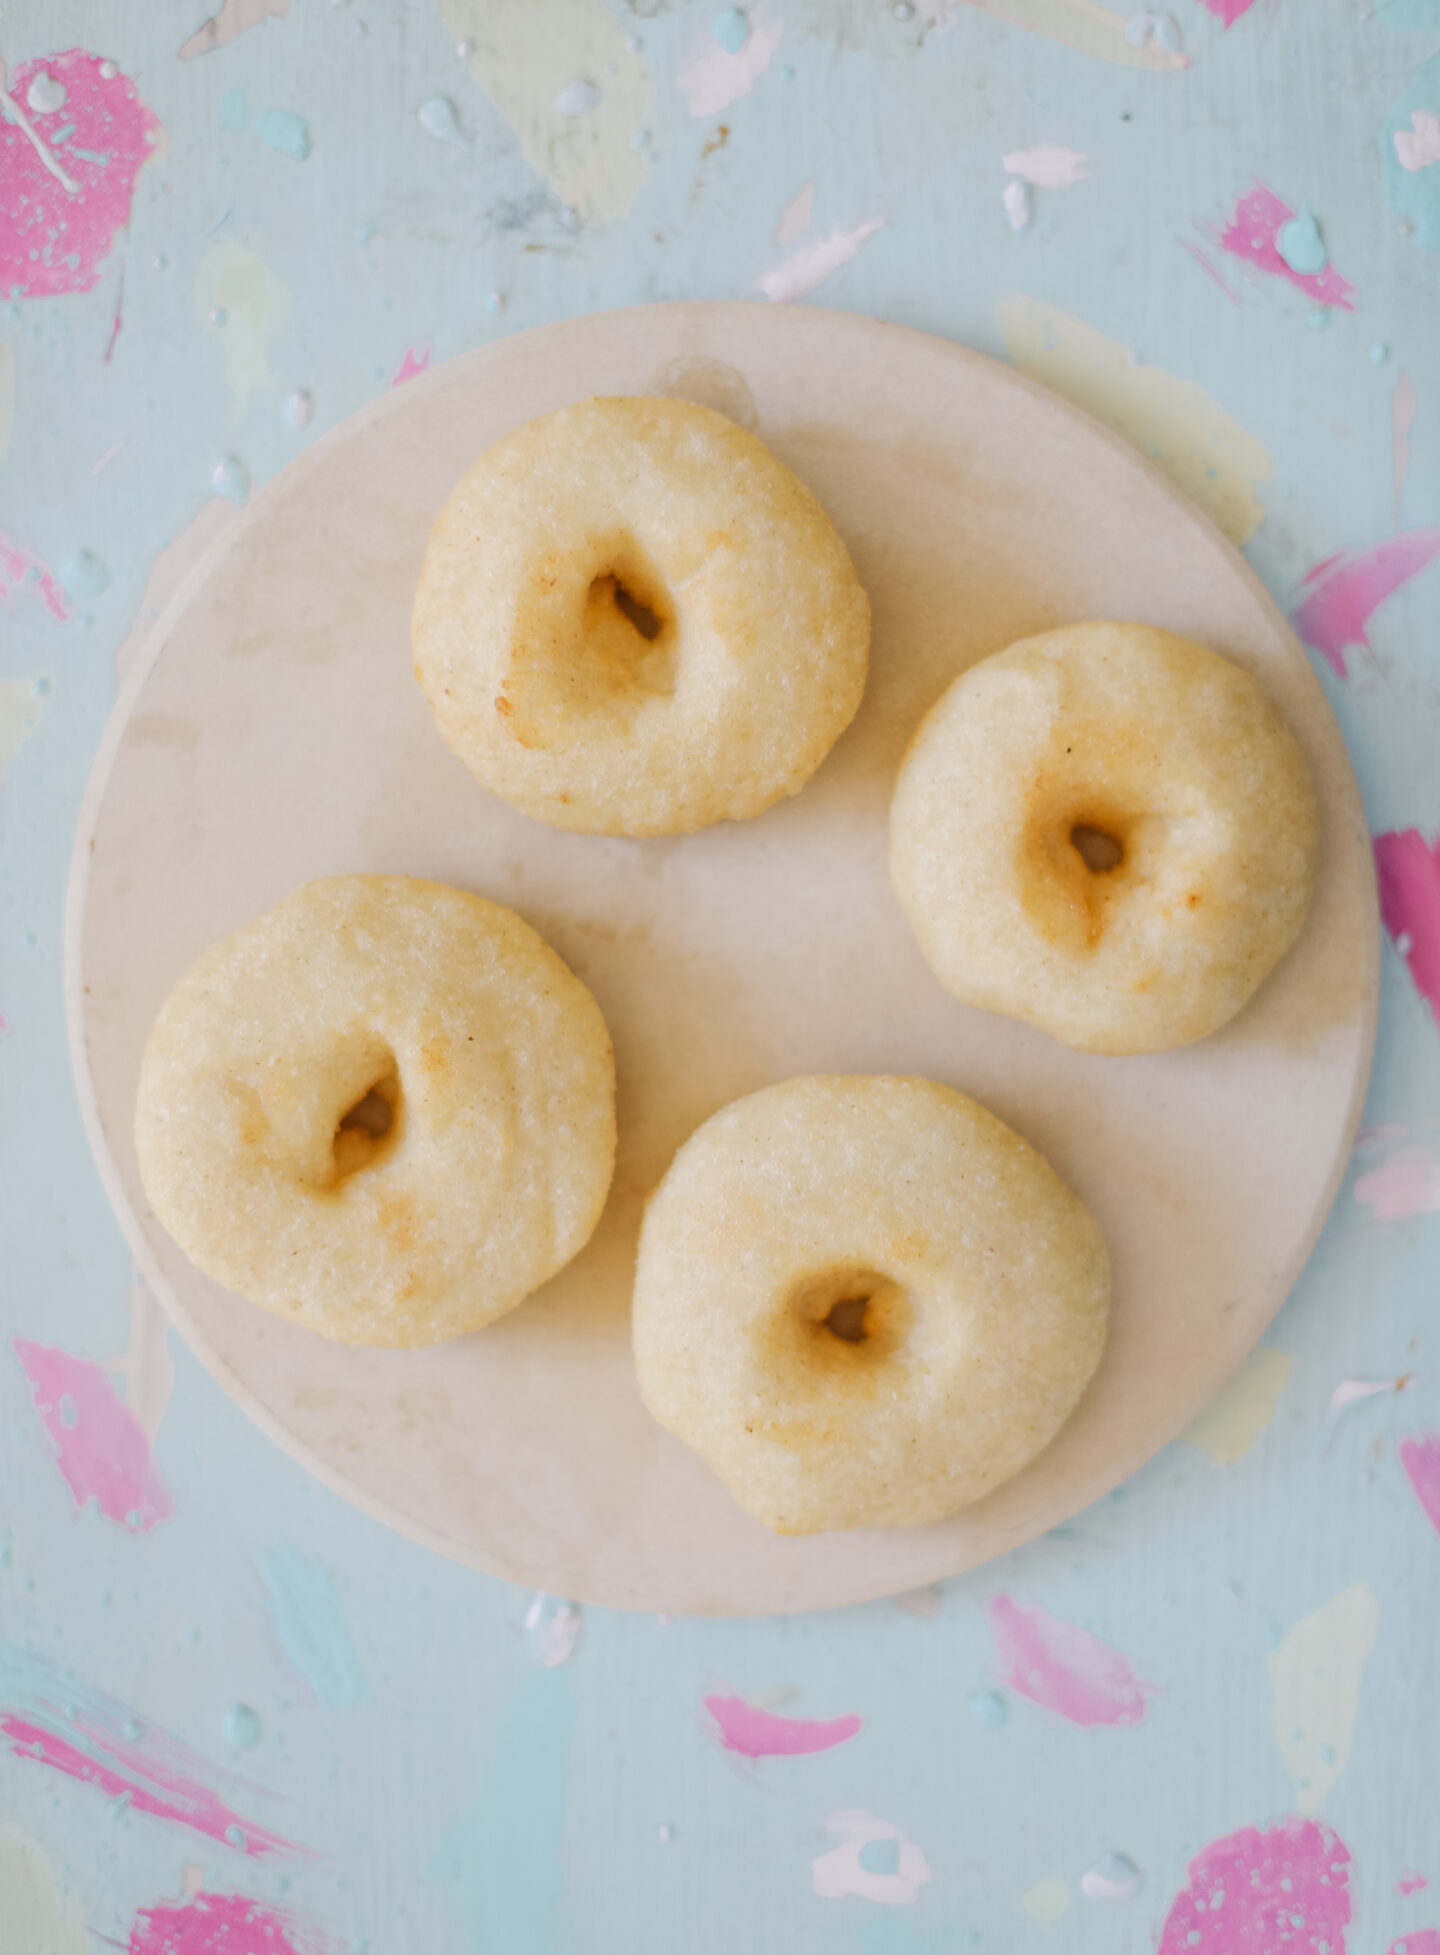 Typical Arepas Recipes in three ways